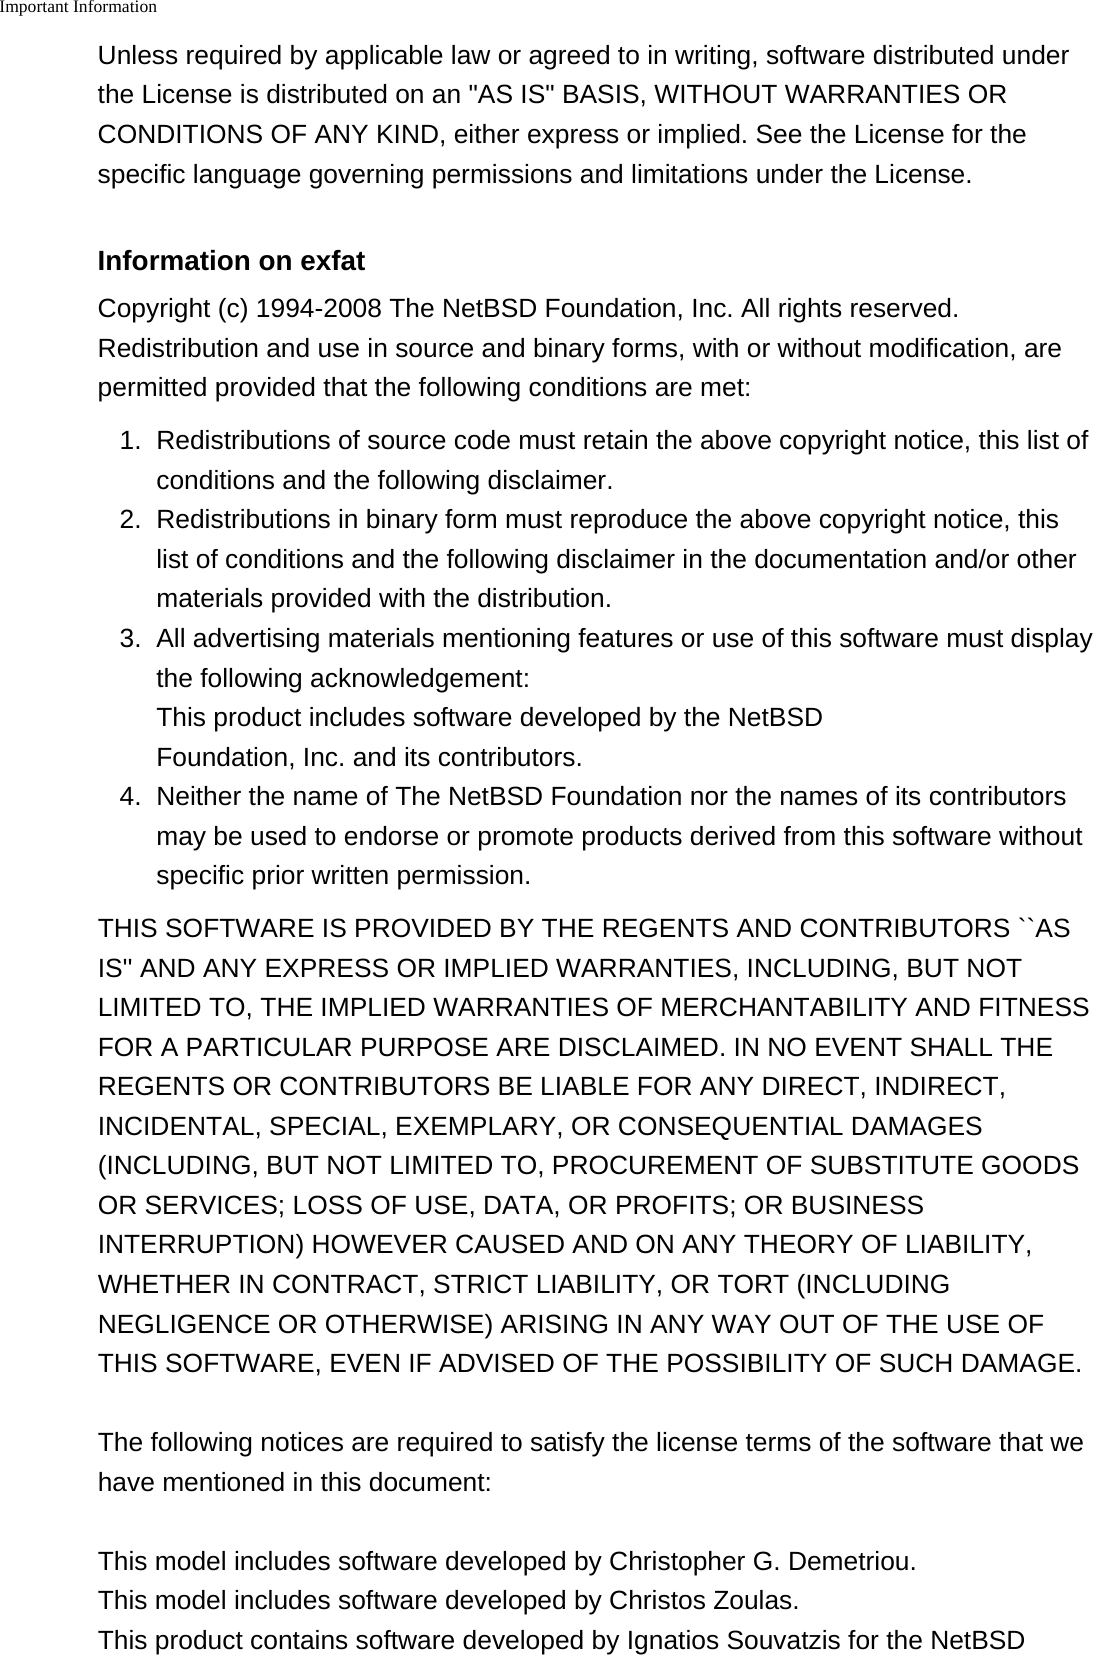 Important Information    Unless required by applicable law or agreed to in writing, software distributed underthe License is distributed on an &quot;AS IS&quot; BASIS, WITHOUT WARRANTIES ORCONDITIONS OF ANY KIND, either express or implied. See the License for thespecific language governing permissions and limitations under the License.Information on exfatCopyright (c) 1994-2008 The NetBSD Foundation, Inc. All rights reserved.Redistribution and use in source and binary forms, with or without modification, arepermitted provided that the following conditions are met:1. Redistributions of source code must retain the above copyright notice, this list ofconditions and the following disclaimer.2. Redistributions in binary form must reproduce the above copyright notice, thislist of conditions and the following disclaimer in the documentation and/or othermaterials provided with the distribution.3. All advertising materials mentioning features or use of this software must displaythe following acknowledgement:This product includes software developed by the NetBSDFoundation, Inc. and its contributors.4. Neither the name of The NetBSD Foundation nor the names of its contributorsmay be used to endorse or promote products derived from this software withoutspecific prior written permission.THIS SOFTWARE IS PROVIDED BY THE REGENTS AND CONTRIBUTORS ``ASIS&apos;&apos; AND ANY EXPRESS OR IMPLIED WARRANTIES, INCLUDING, BUT NOTLIMITED TO, THE IMPLIED WARRANTIES OF MERCHANTABILITY AND FITNESSFOR A PARTICULAR PURPOSE ARE DISCLAIMED. IN NO EVENT SHALL THEREGENTS OR CONTRIBUTORS BE LIABLE FOR ANY DIRECT, INDIRECT,INCIDENTAL, SPECIAL, EXEMPLARY, OR CONSEQUENTIAL DAMAGES(INCLUDING, BUT NOT LIMITED TO, PROCUREMENT OF SUBSTITUTE GOODSOR SERVICES; LOSS OF USE, DATA, OR PROFITS; OR BUSINESSINTERRUPTION) HOWEVER CAUSED AND ON ANY THEORY OF LIABILITY,WHETHER IN CONTRACT, STRICT LIABILITY, OR TORT (INCLUDINGNEGLIGENCE OR OTHERWISE) ARISING IN ANY WAY OUT OF THE USE OFTHIS SOFTWARE, EVEN IF ADVISED OF THE POSSIBILITY OF SUCH DAMAGE.The following notices are required to satisfy the license terms of the software that wehave mentioned in this document:This model includes software developed by Christopher G. Demetriou.This model includes software developed by Christos Zoulas.This product contains software developed by Ignatios Souvatzis for the NetBSD